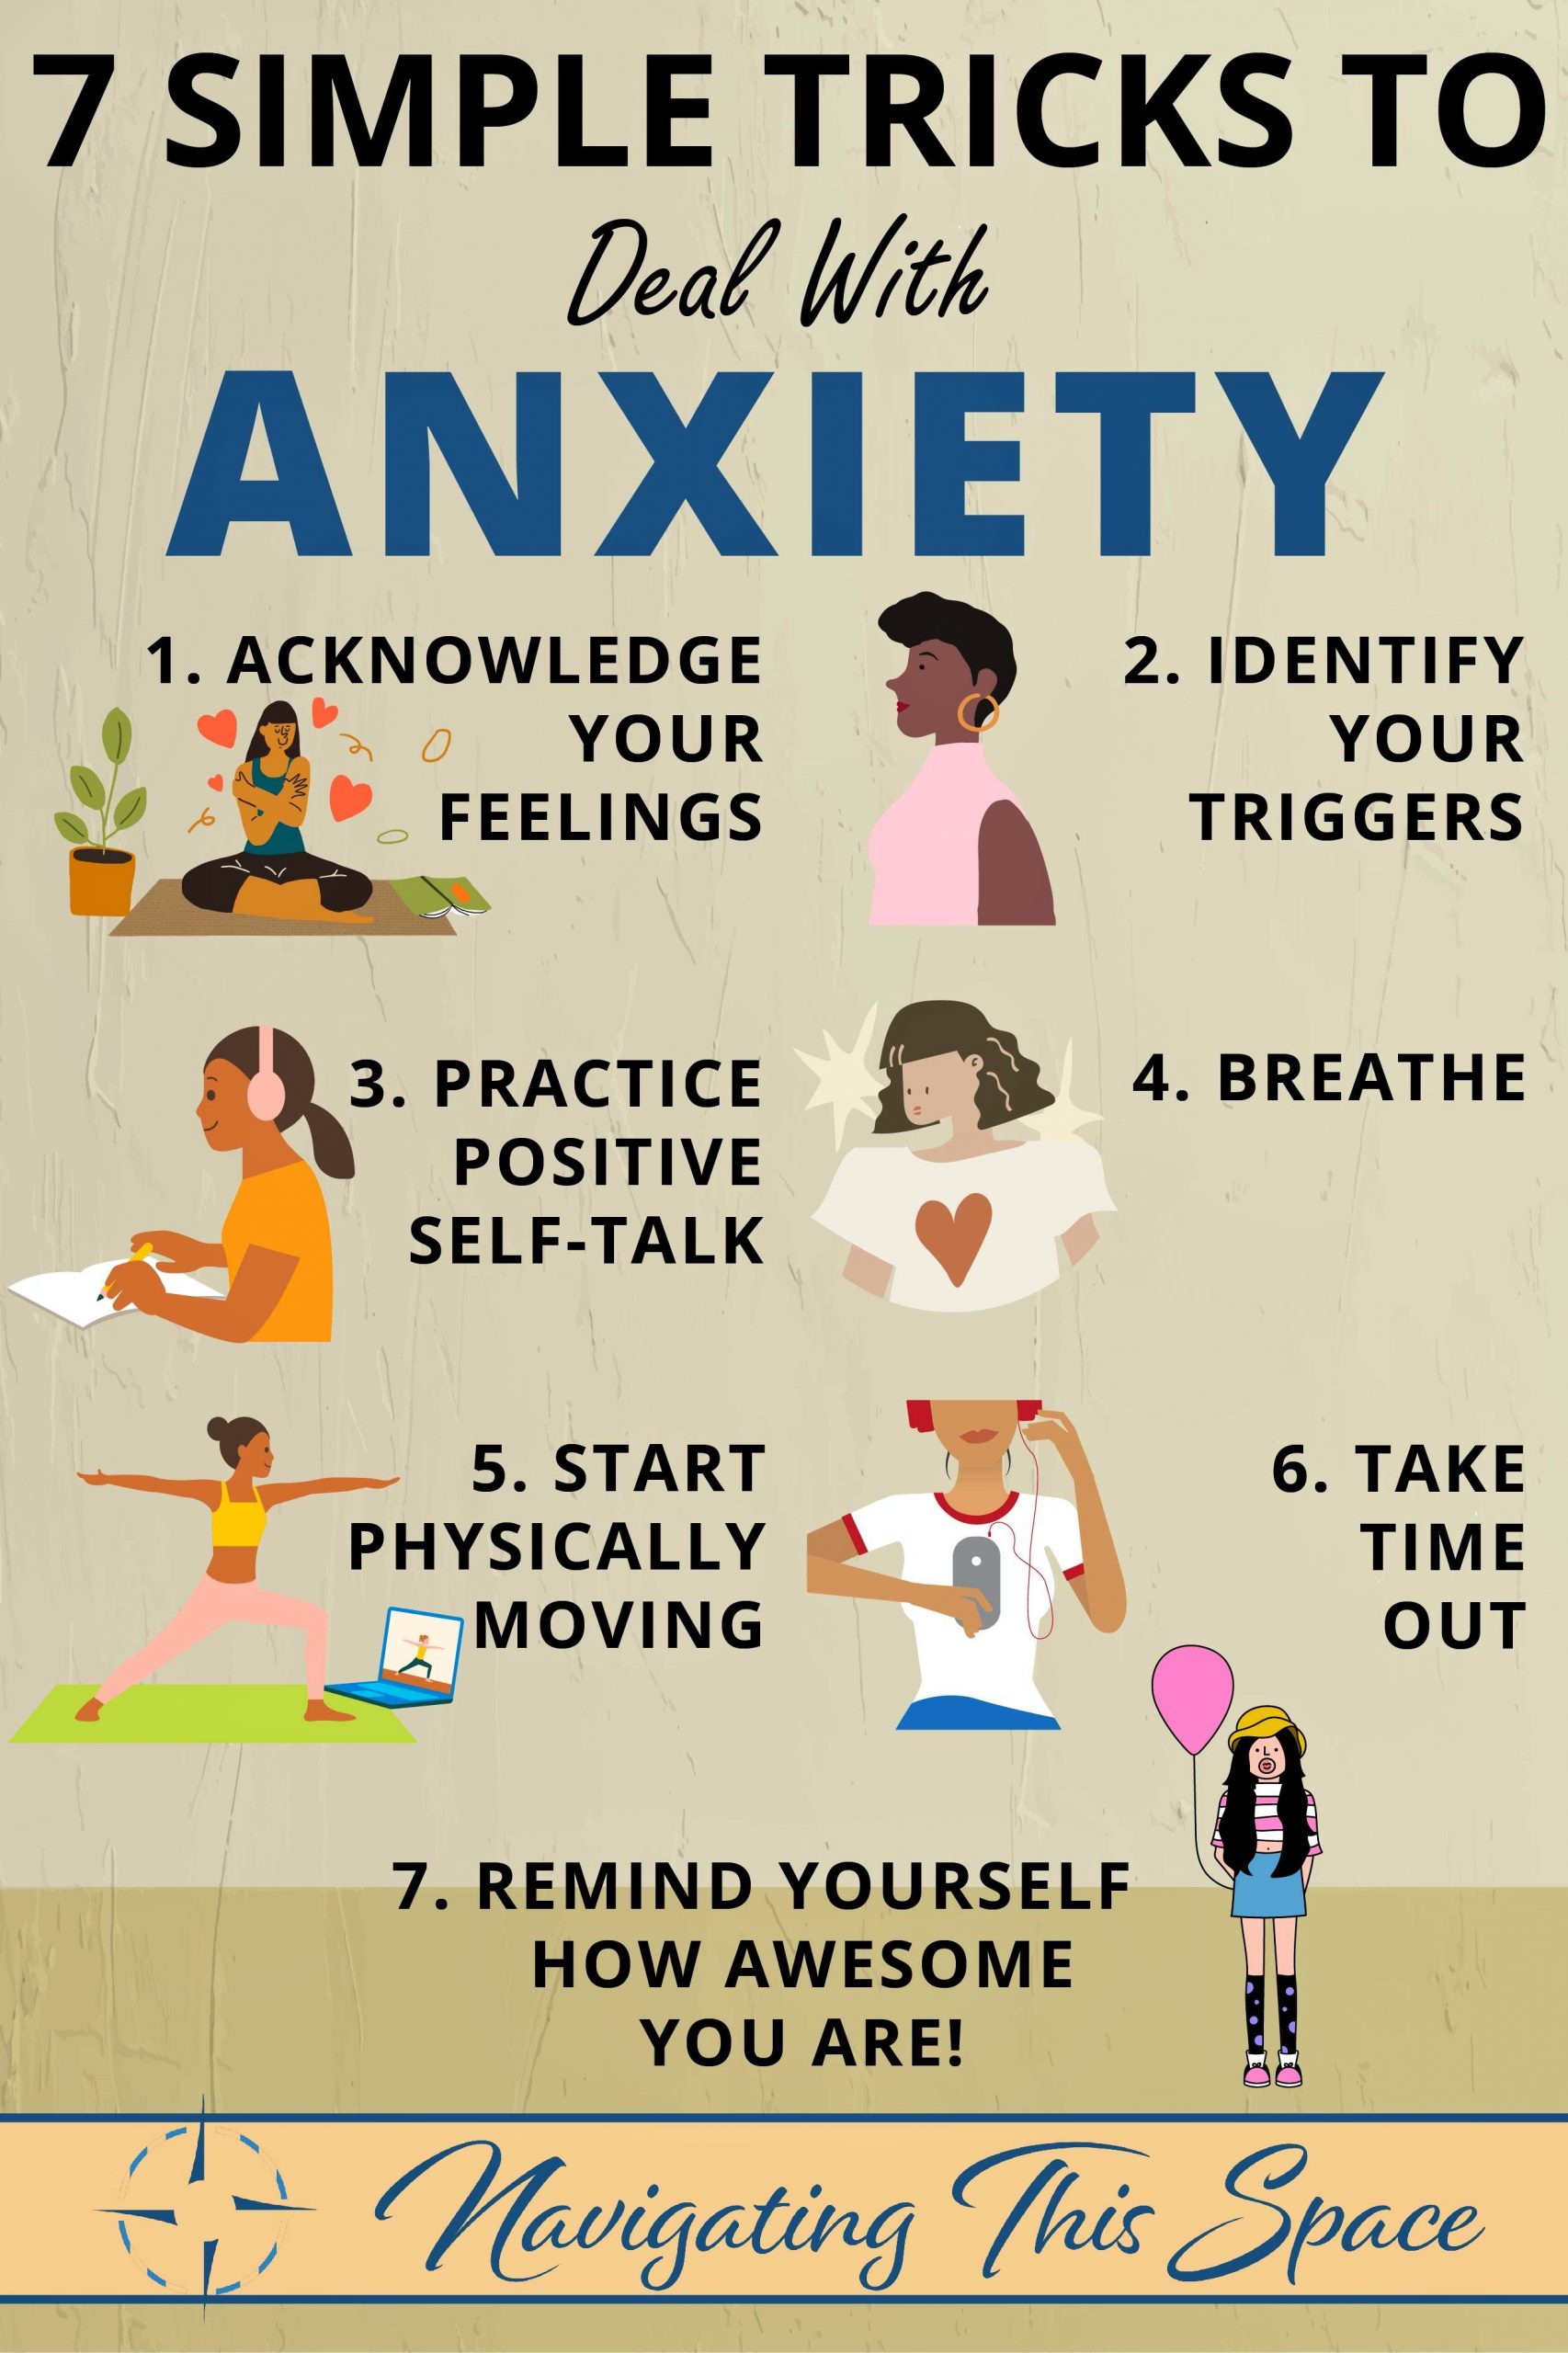 7 Simple tricks to deal with Anxiety